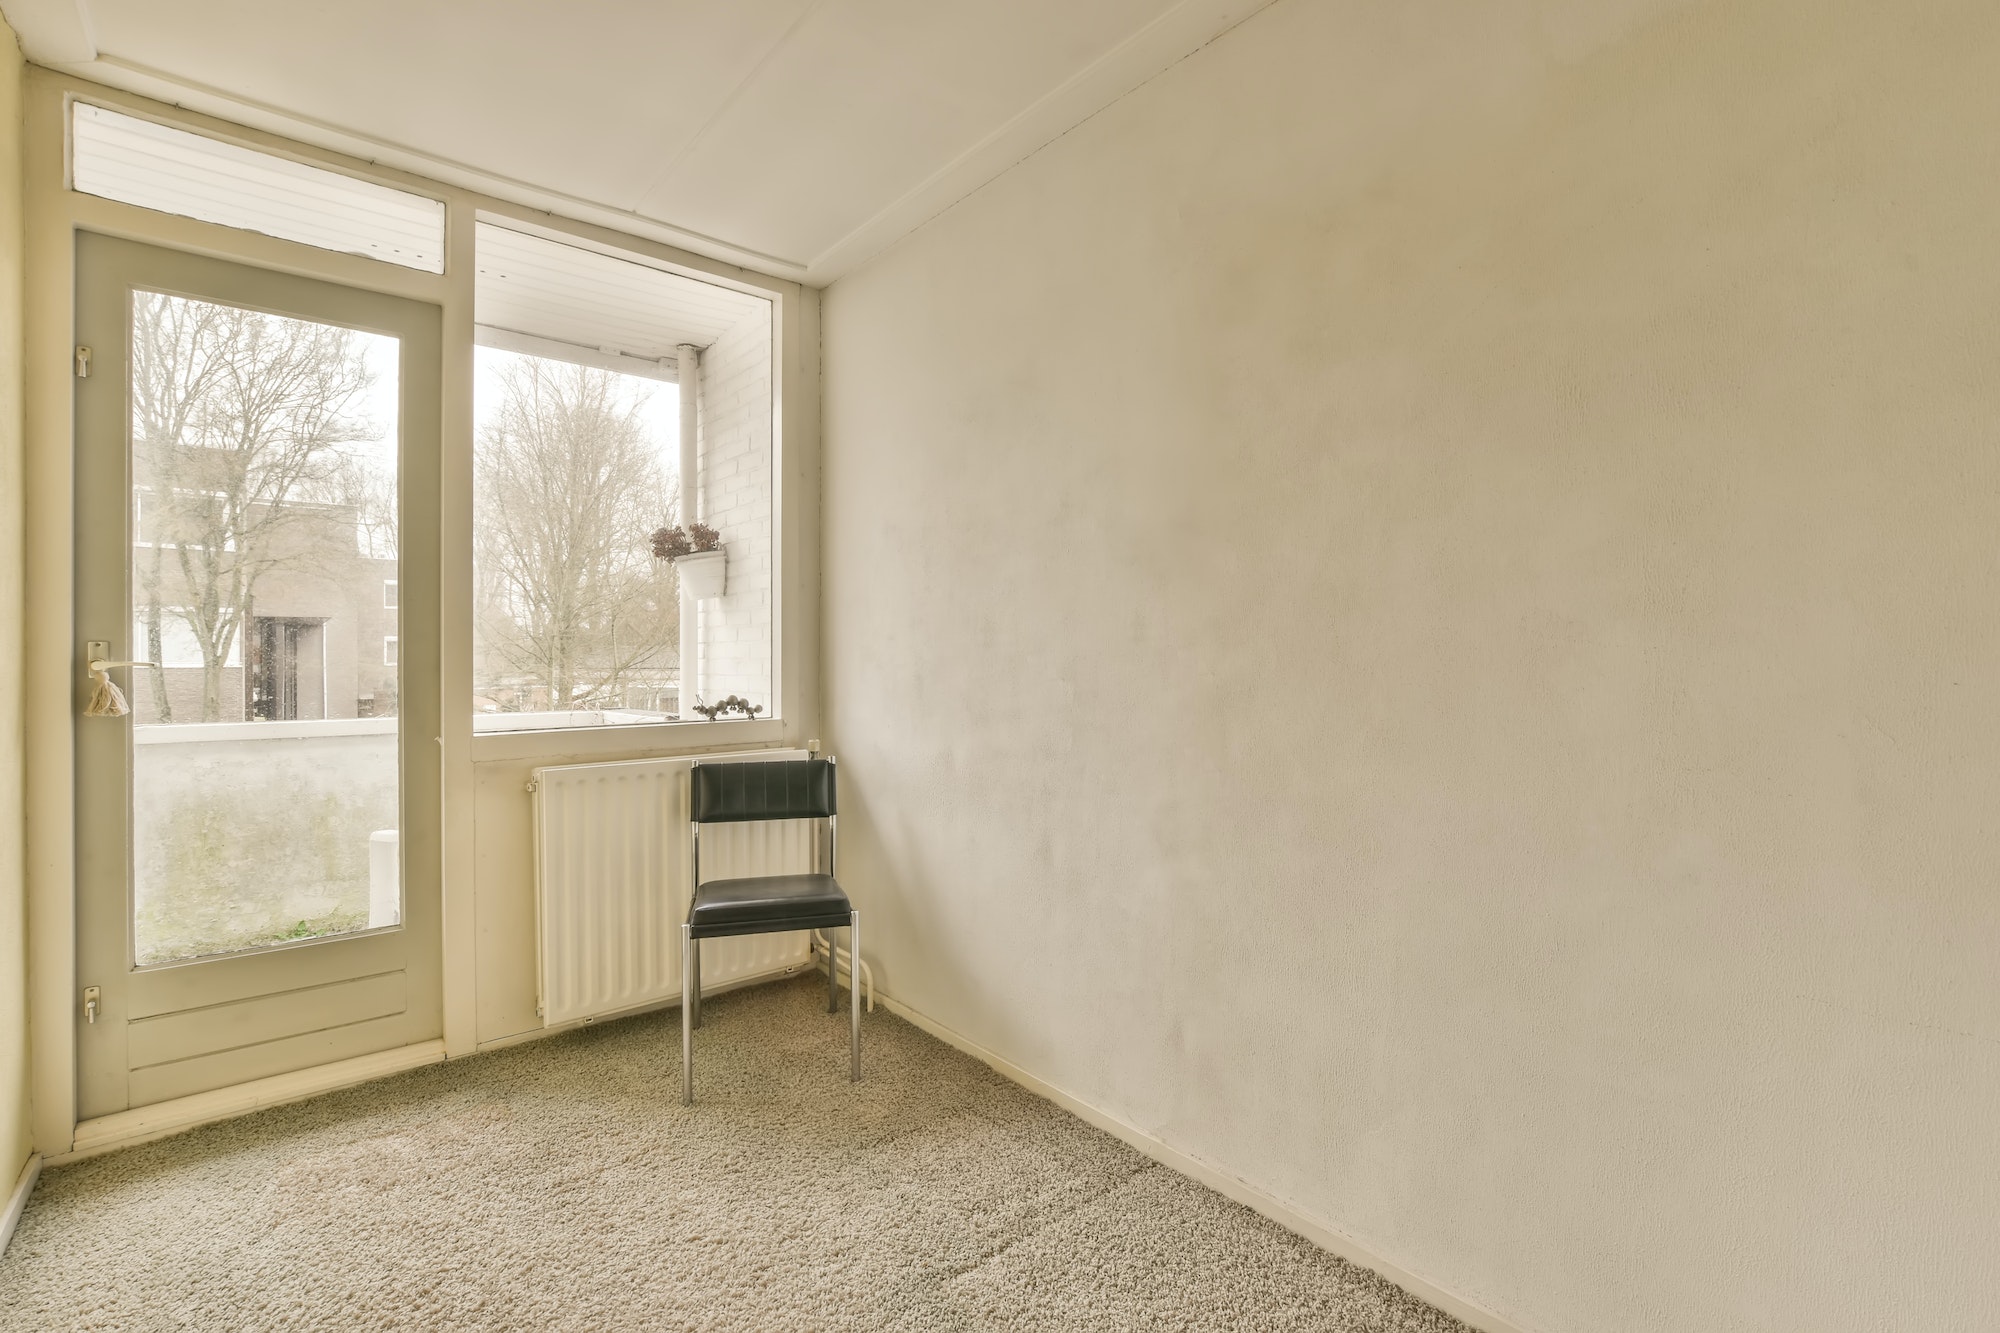 A small empty room with a large window